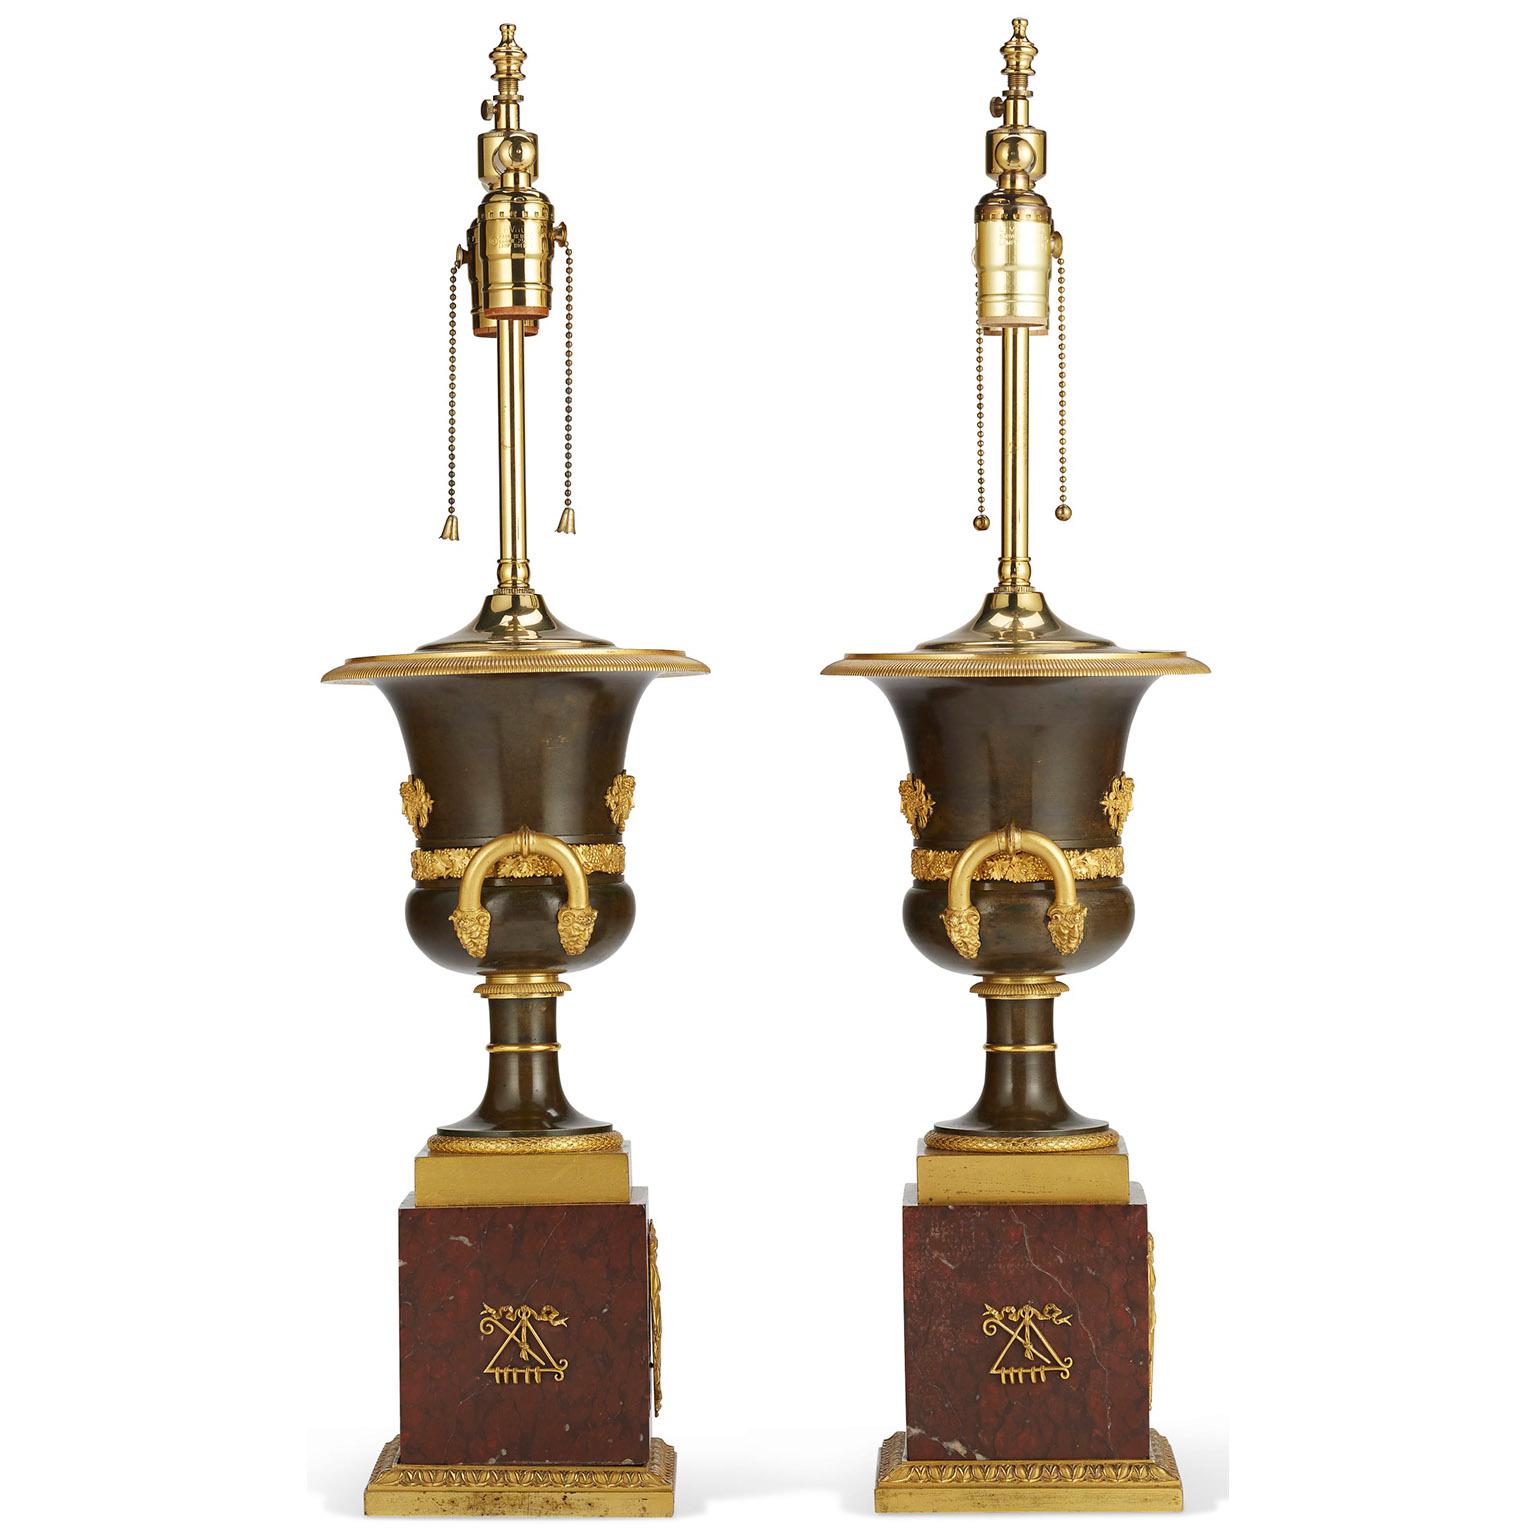 Pair French 19th Century Napoleon III Empire Style Gilt-Bronze Urn Table Lamps For Sale 2